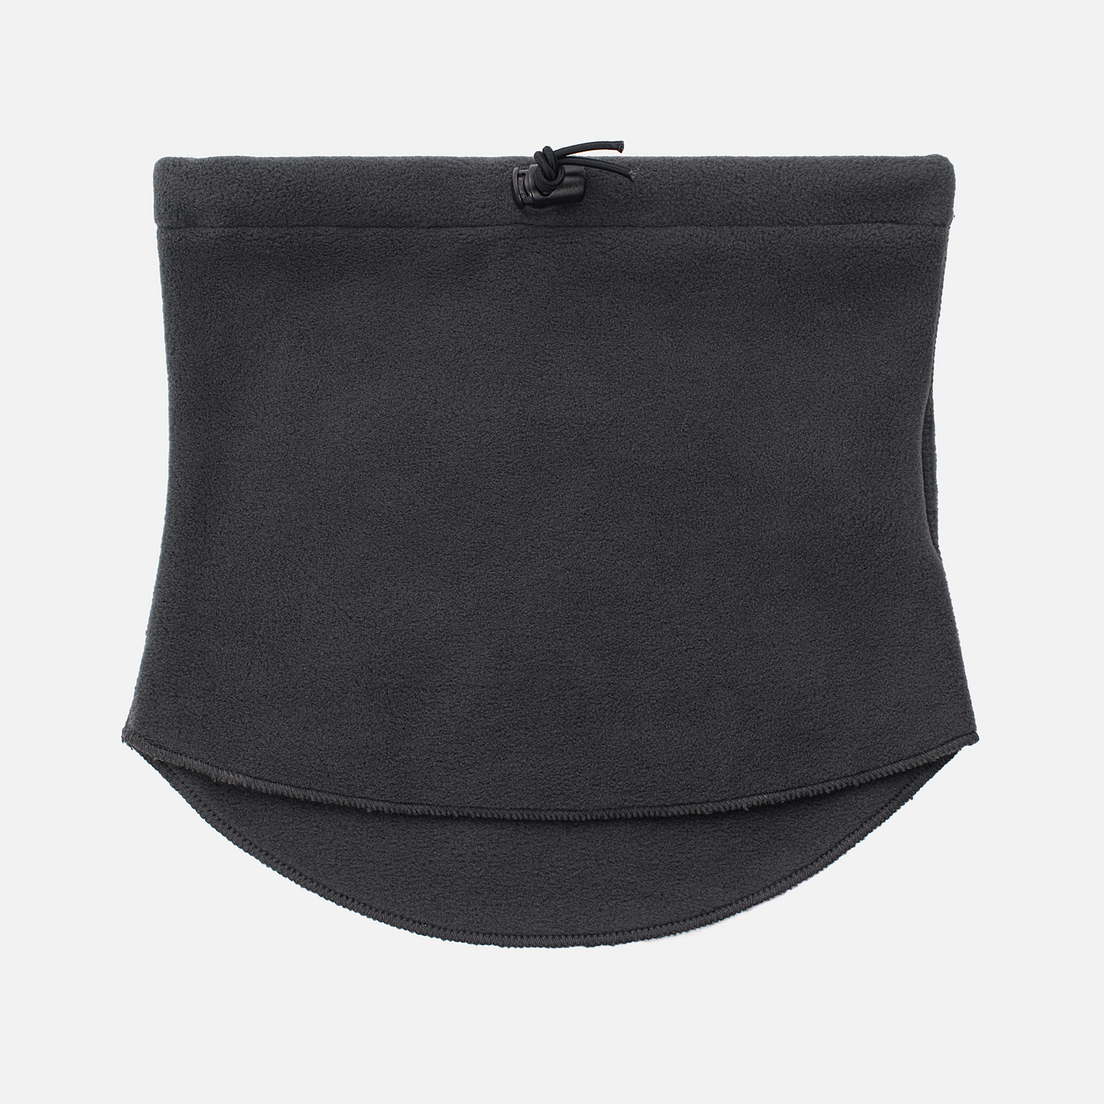 The North Face Шарф Neck Gaiter